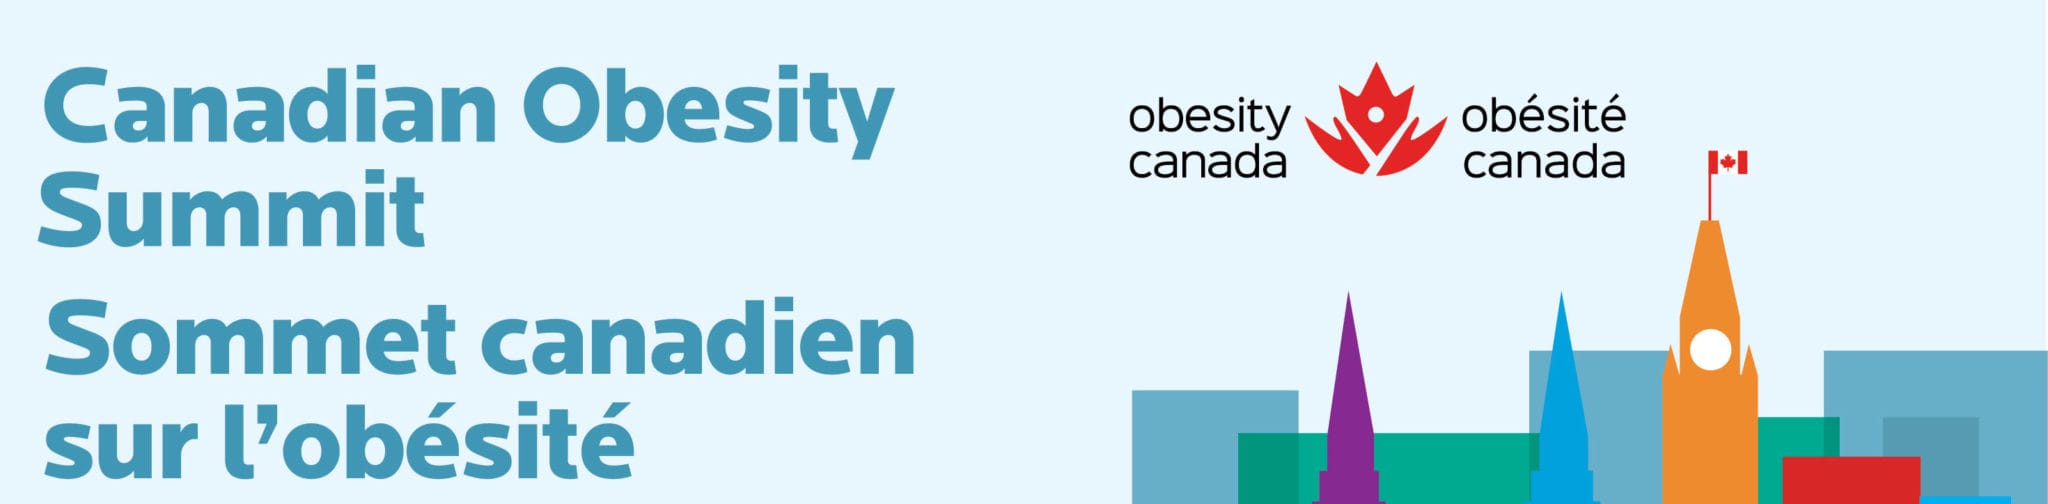 Promotional banner for the canadian obesity summit, featuring the event name in english and french with obesity canada's logo and colorful abstract skyline graphics.